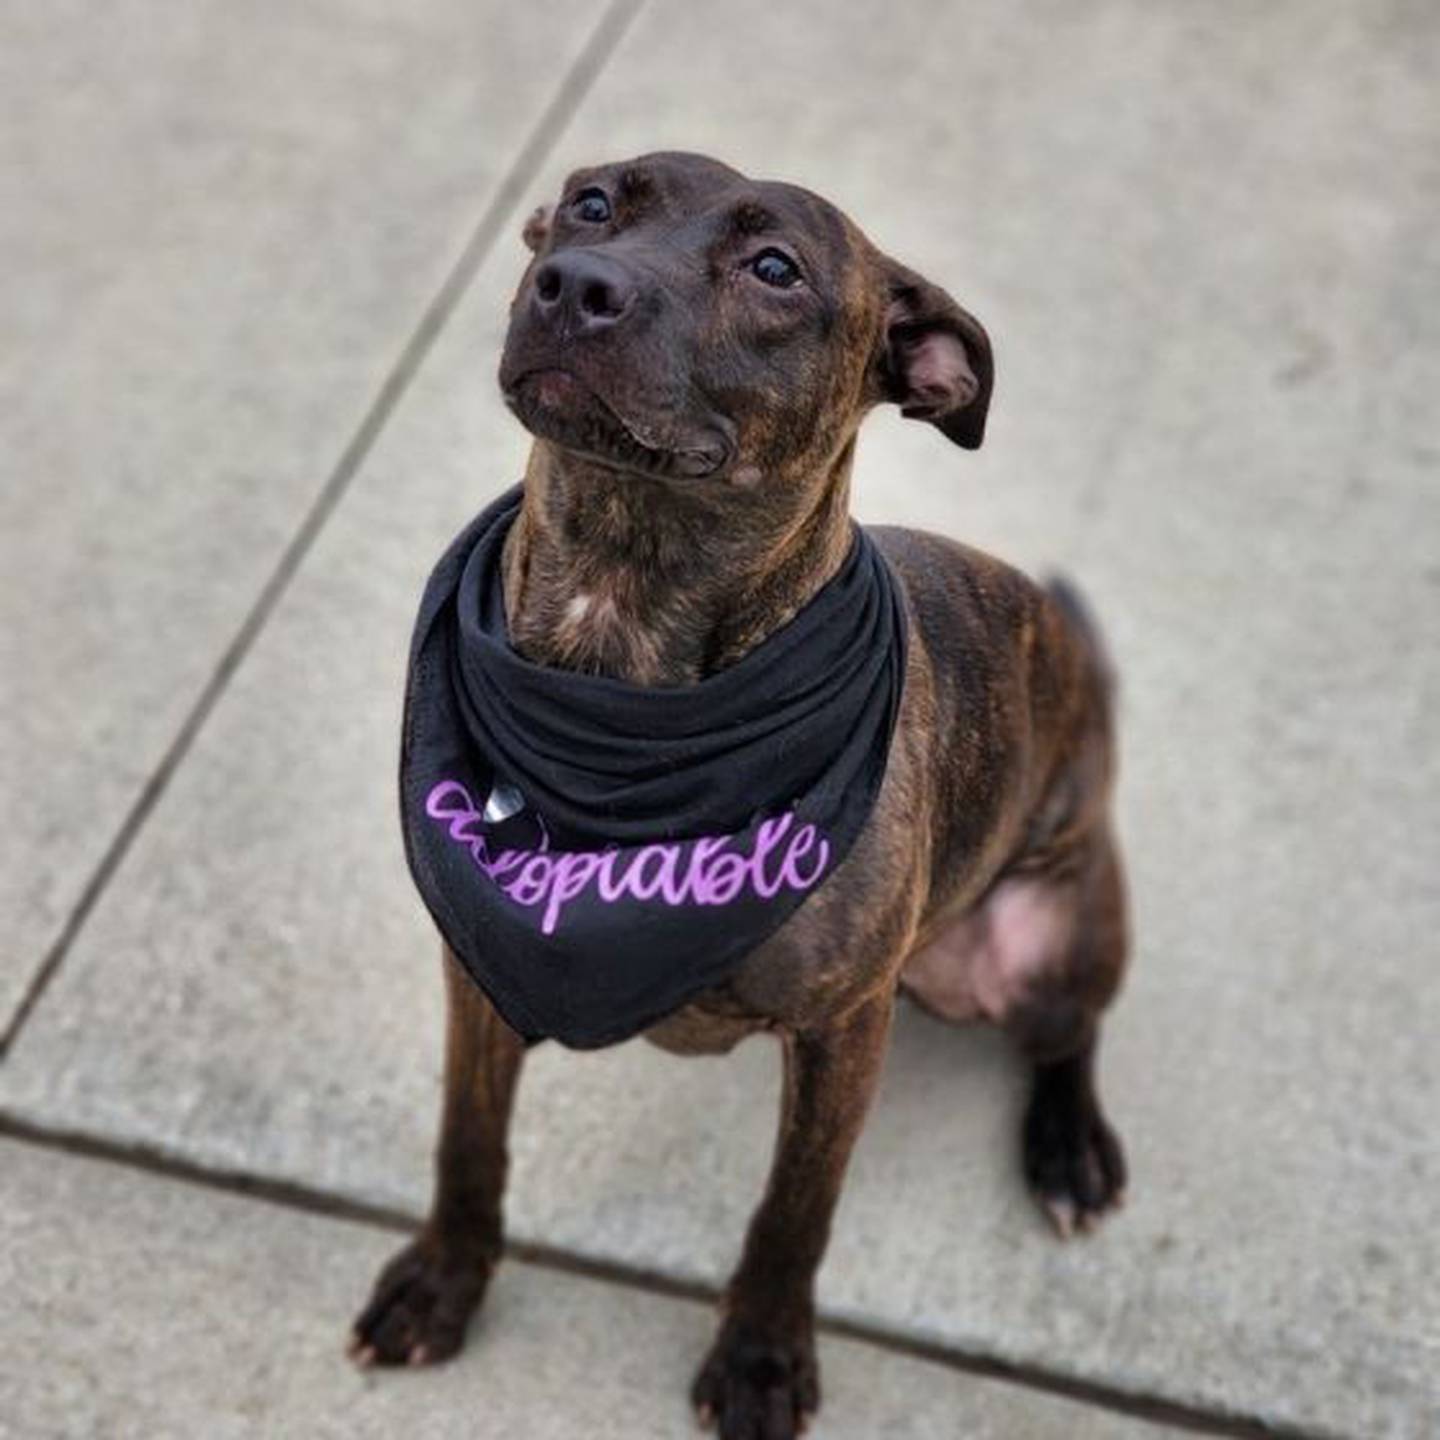 Sweet Sable weighs 40.12 pounds. She loves to be with people, and she loves to play. She is great with kids. Sable loves to socialize with dogs but not cats. To meet Sable, contact Hopeful Tails Animal Rescue at hopefultailsadoptions@outlook.com. Visit hopefultailsanimalrescue.org.